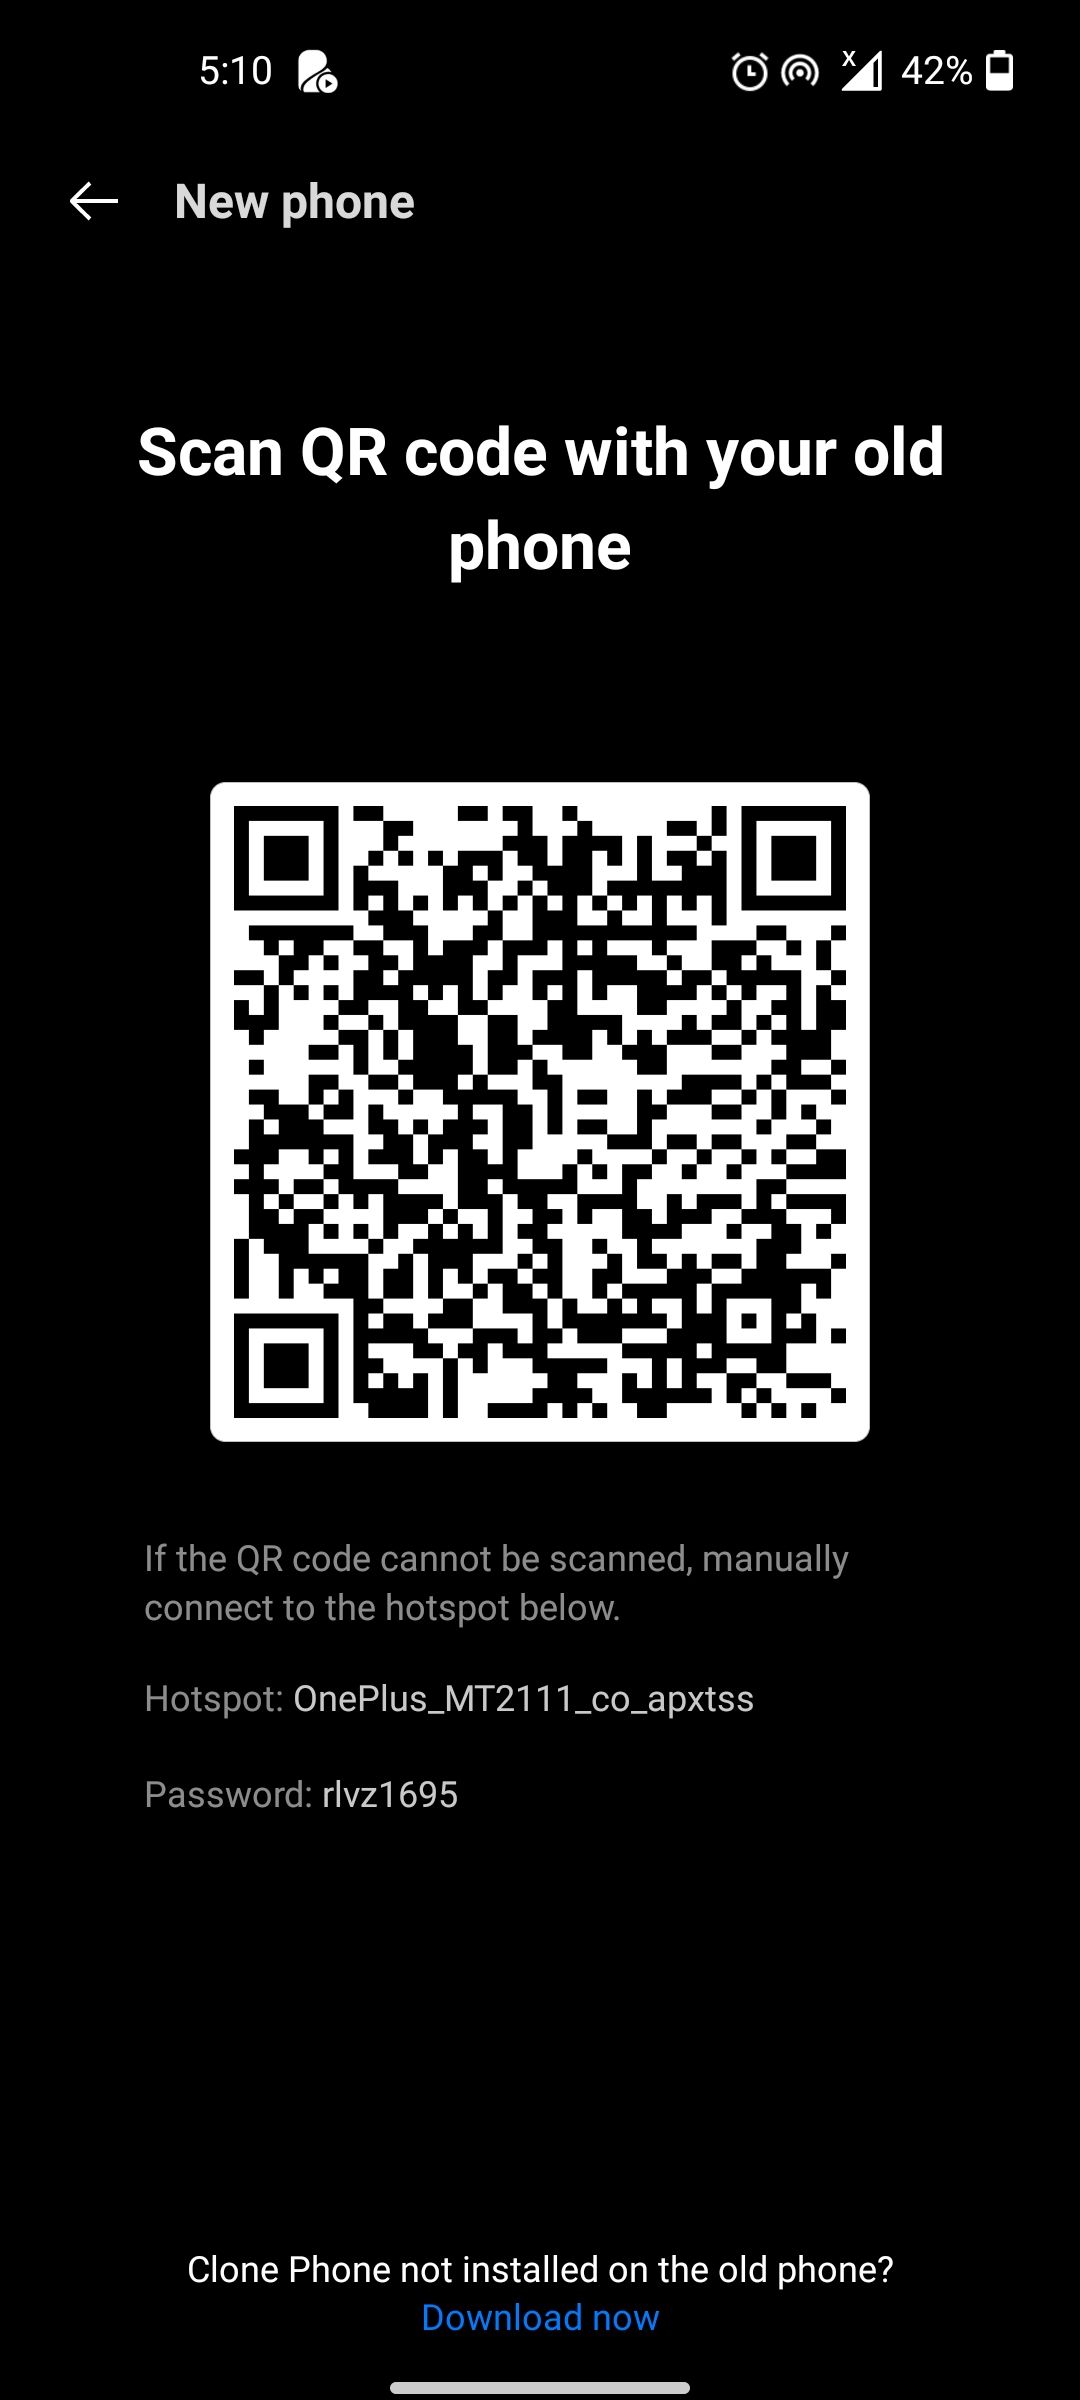 Clone Phone displaying a QR code for connection